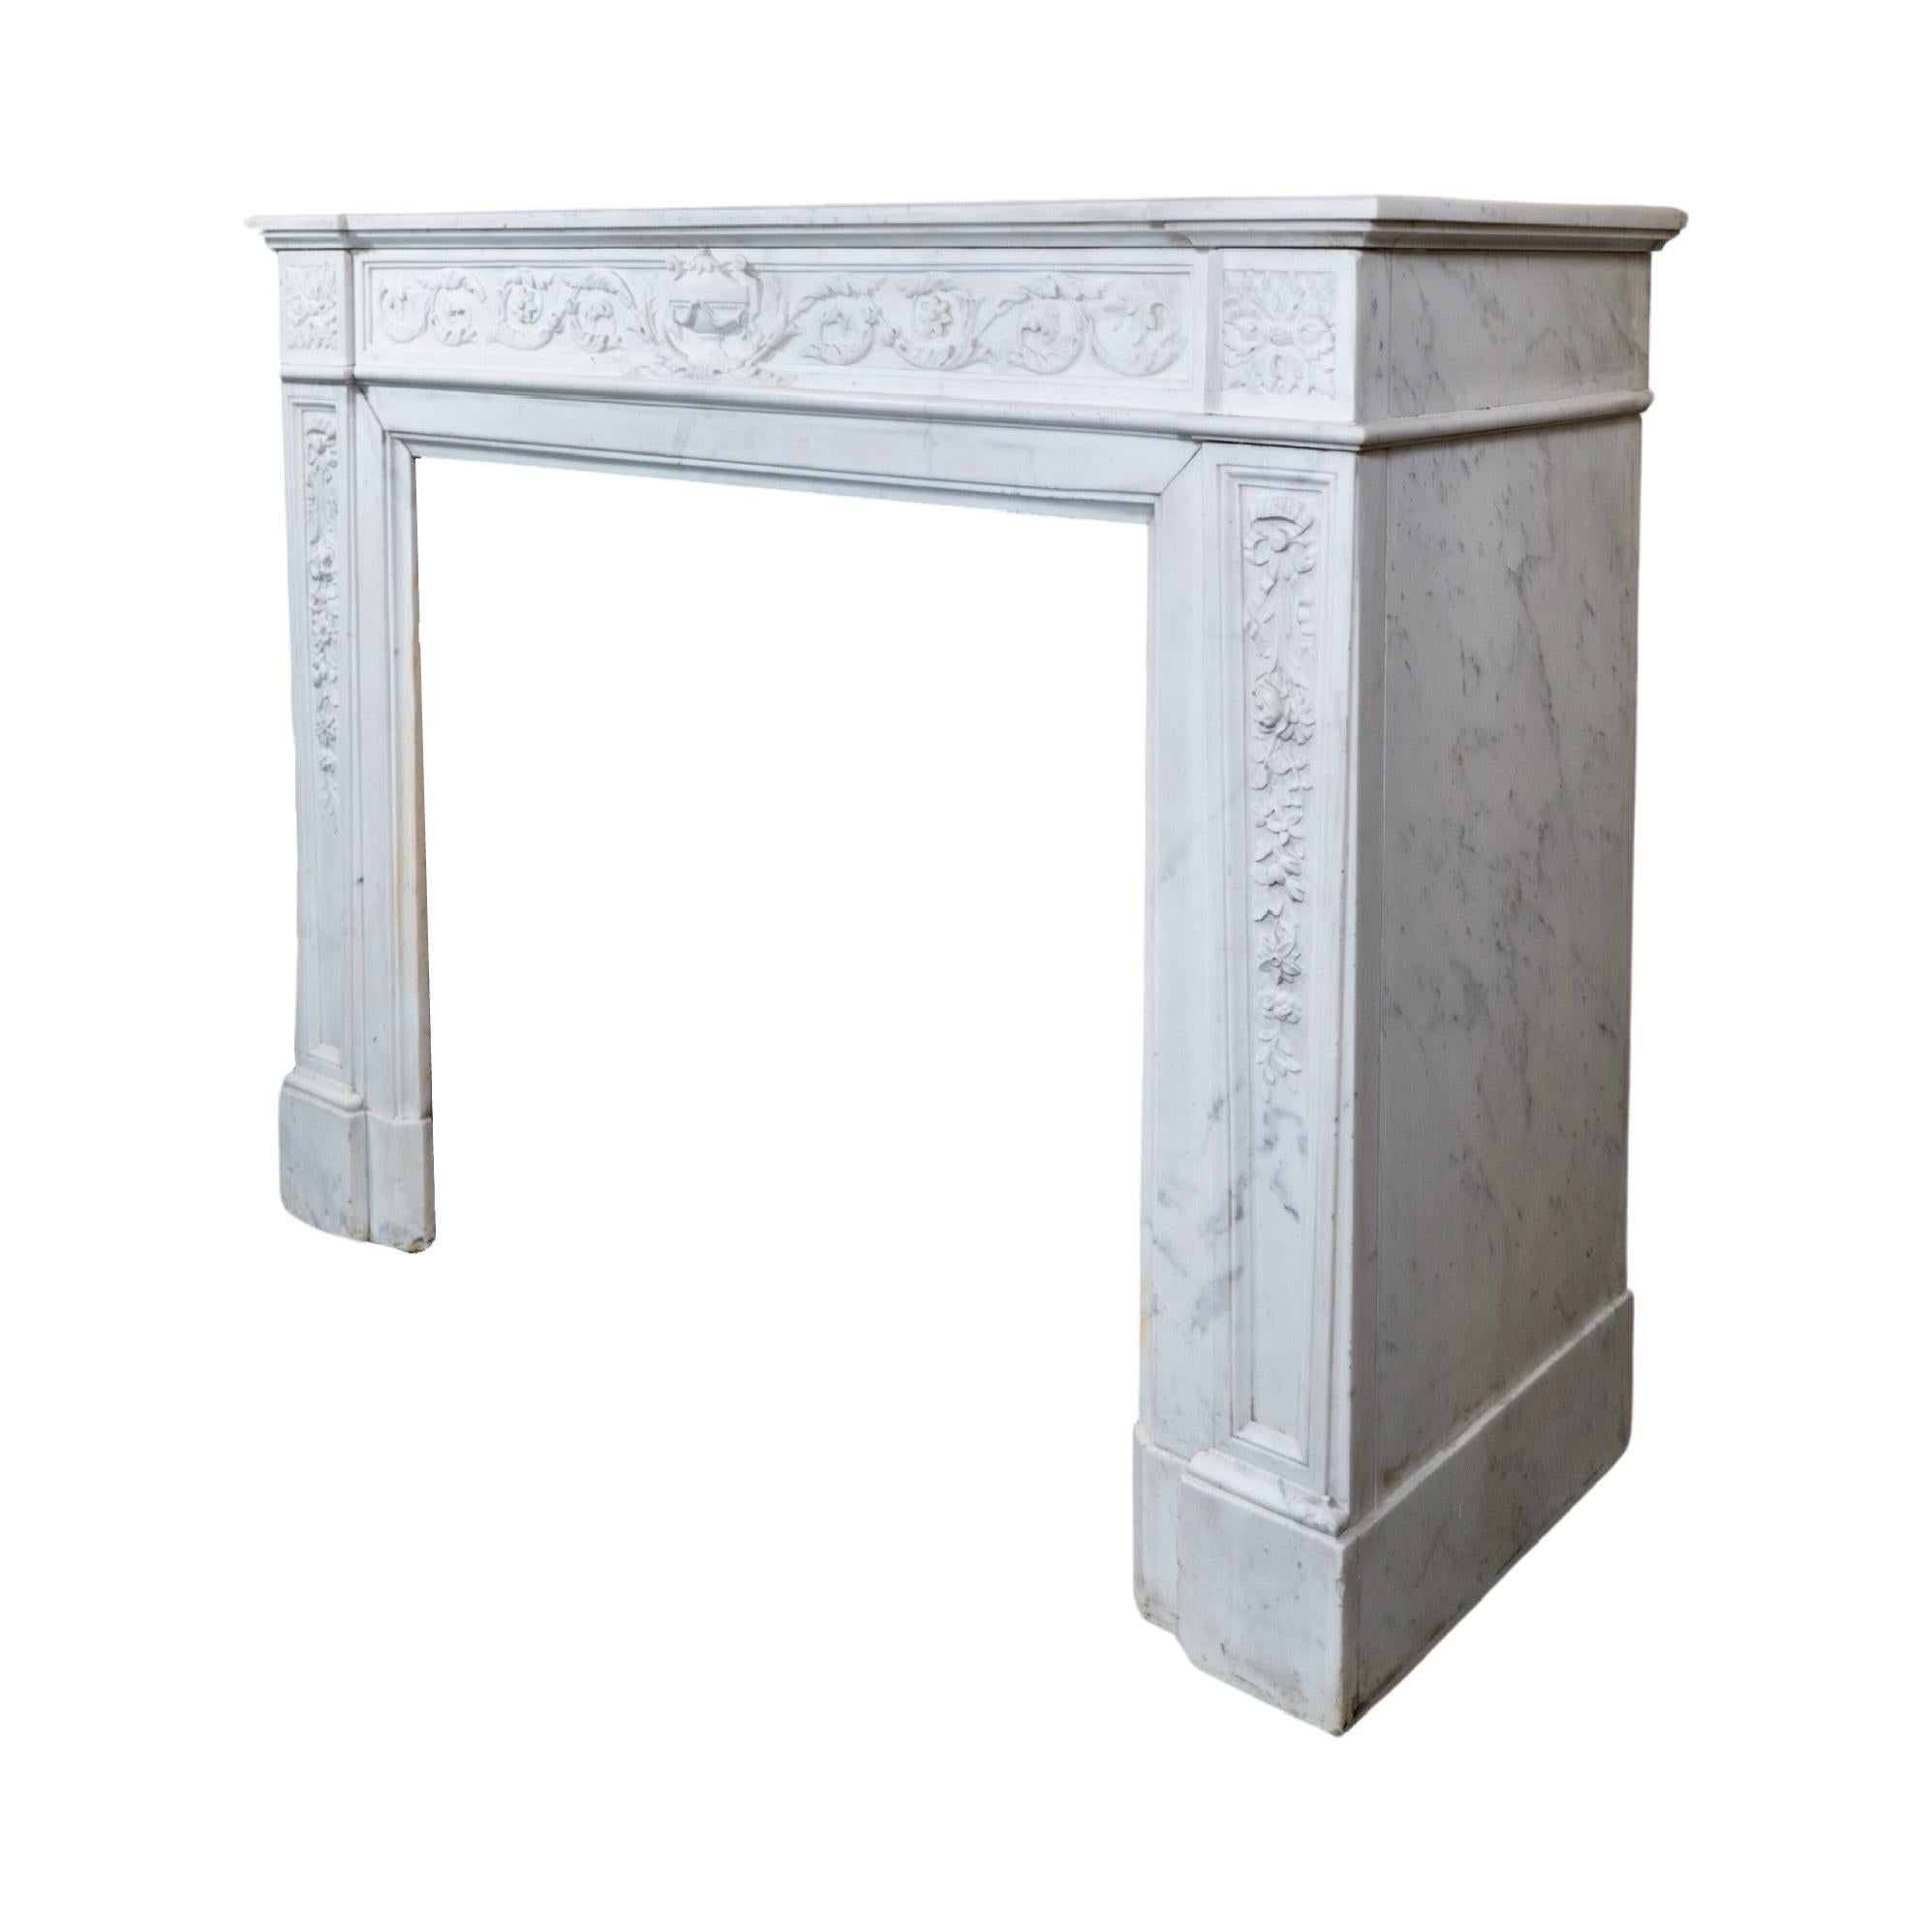 Mid-19th Century Carrara Marble Mantel from France For Sale 6